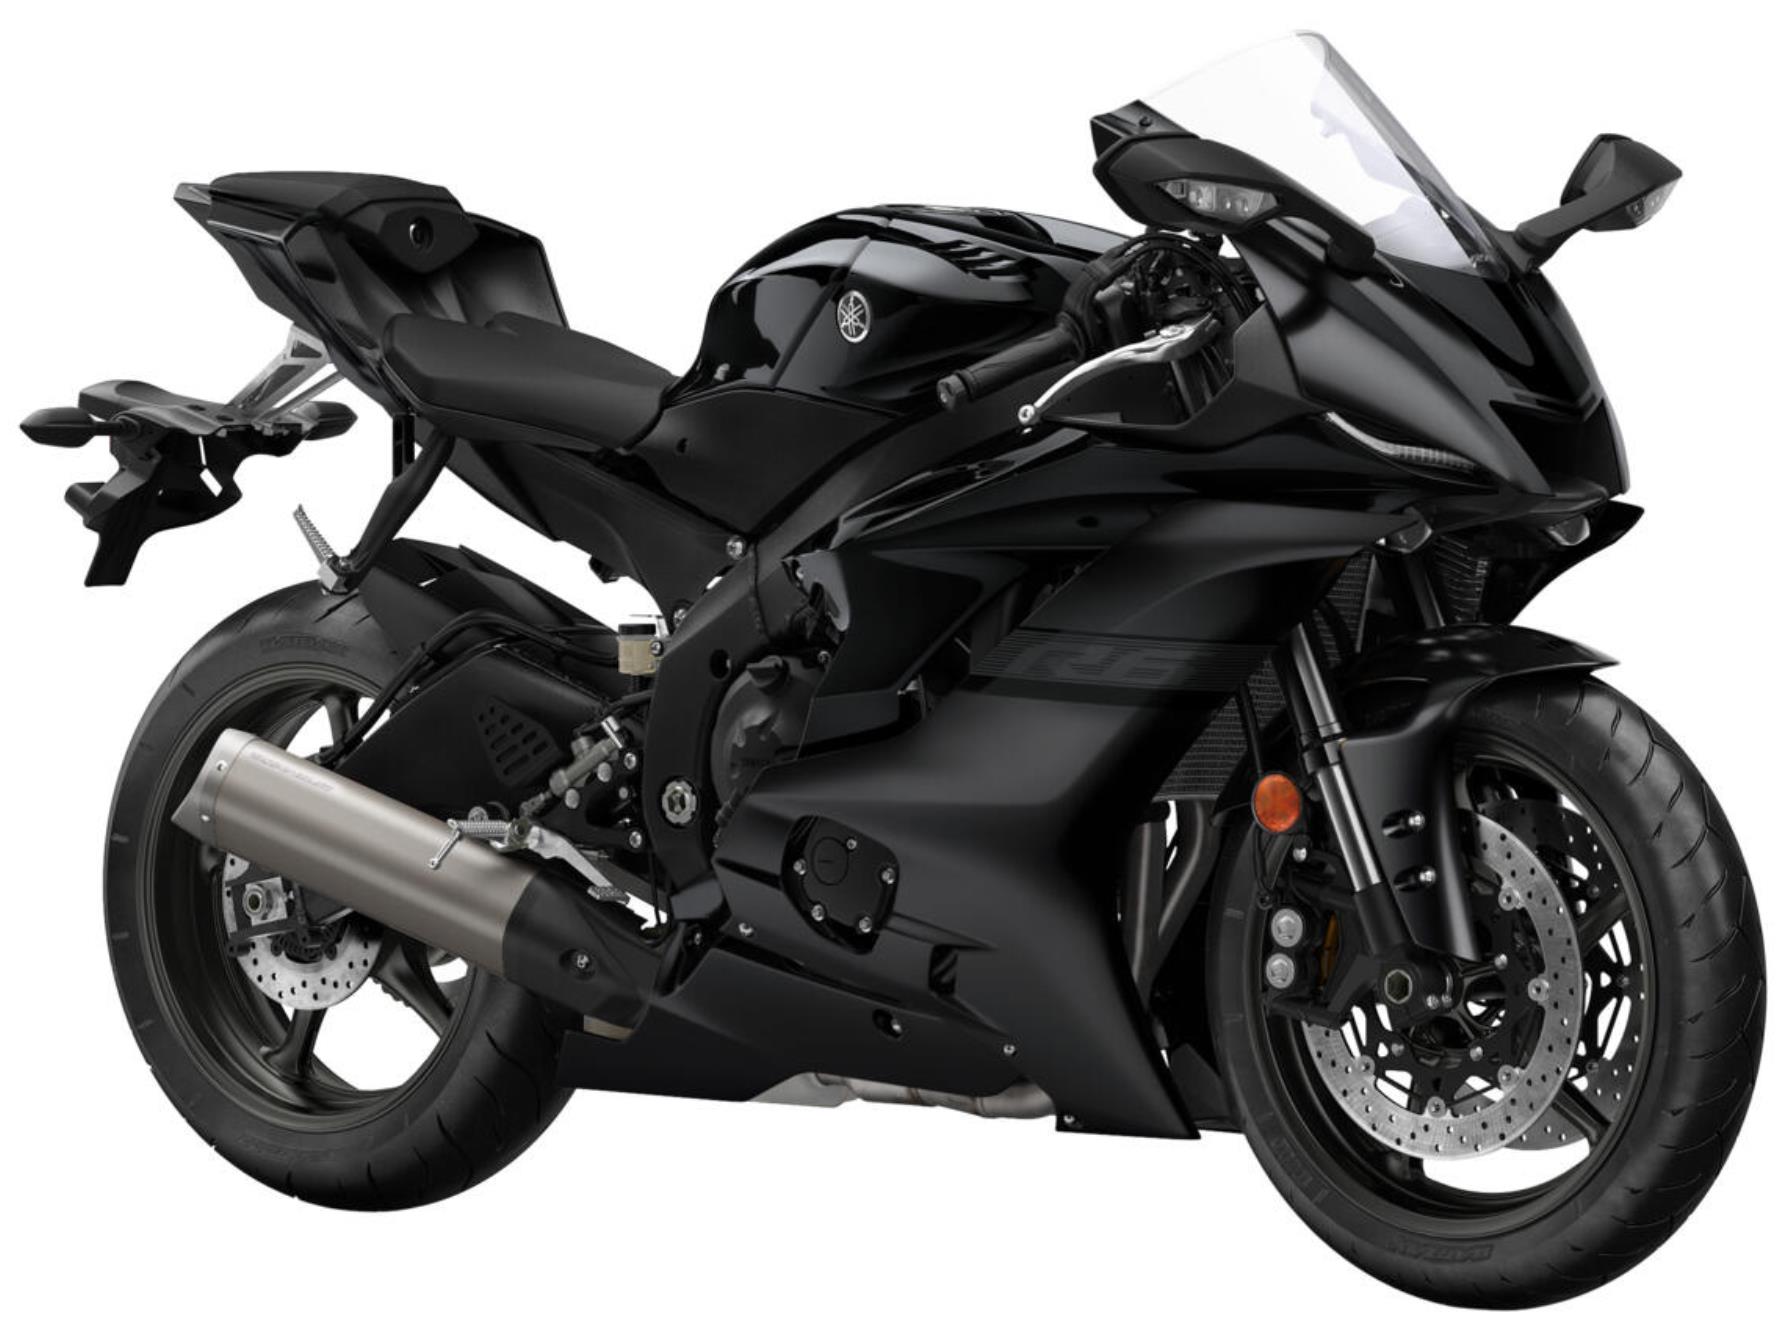 2022 Yamaha YZF-R6 Specifications and Expected Price in India